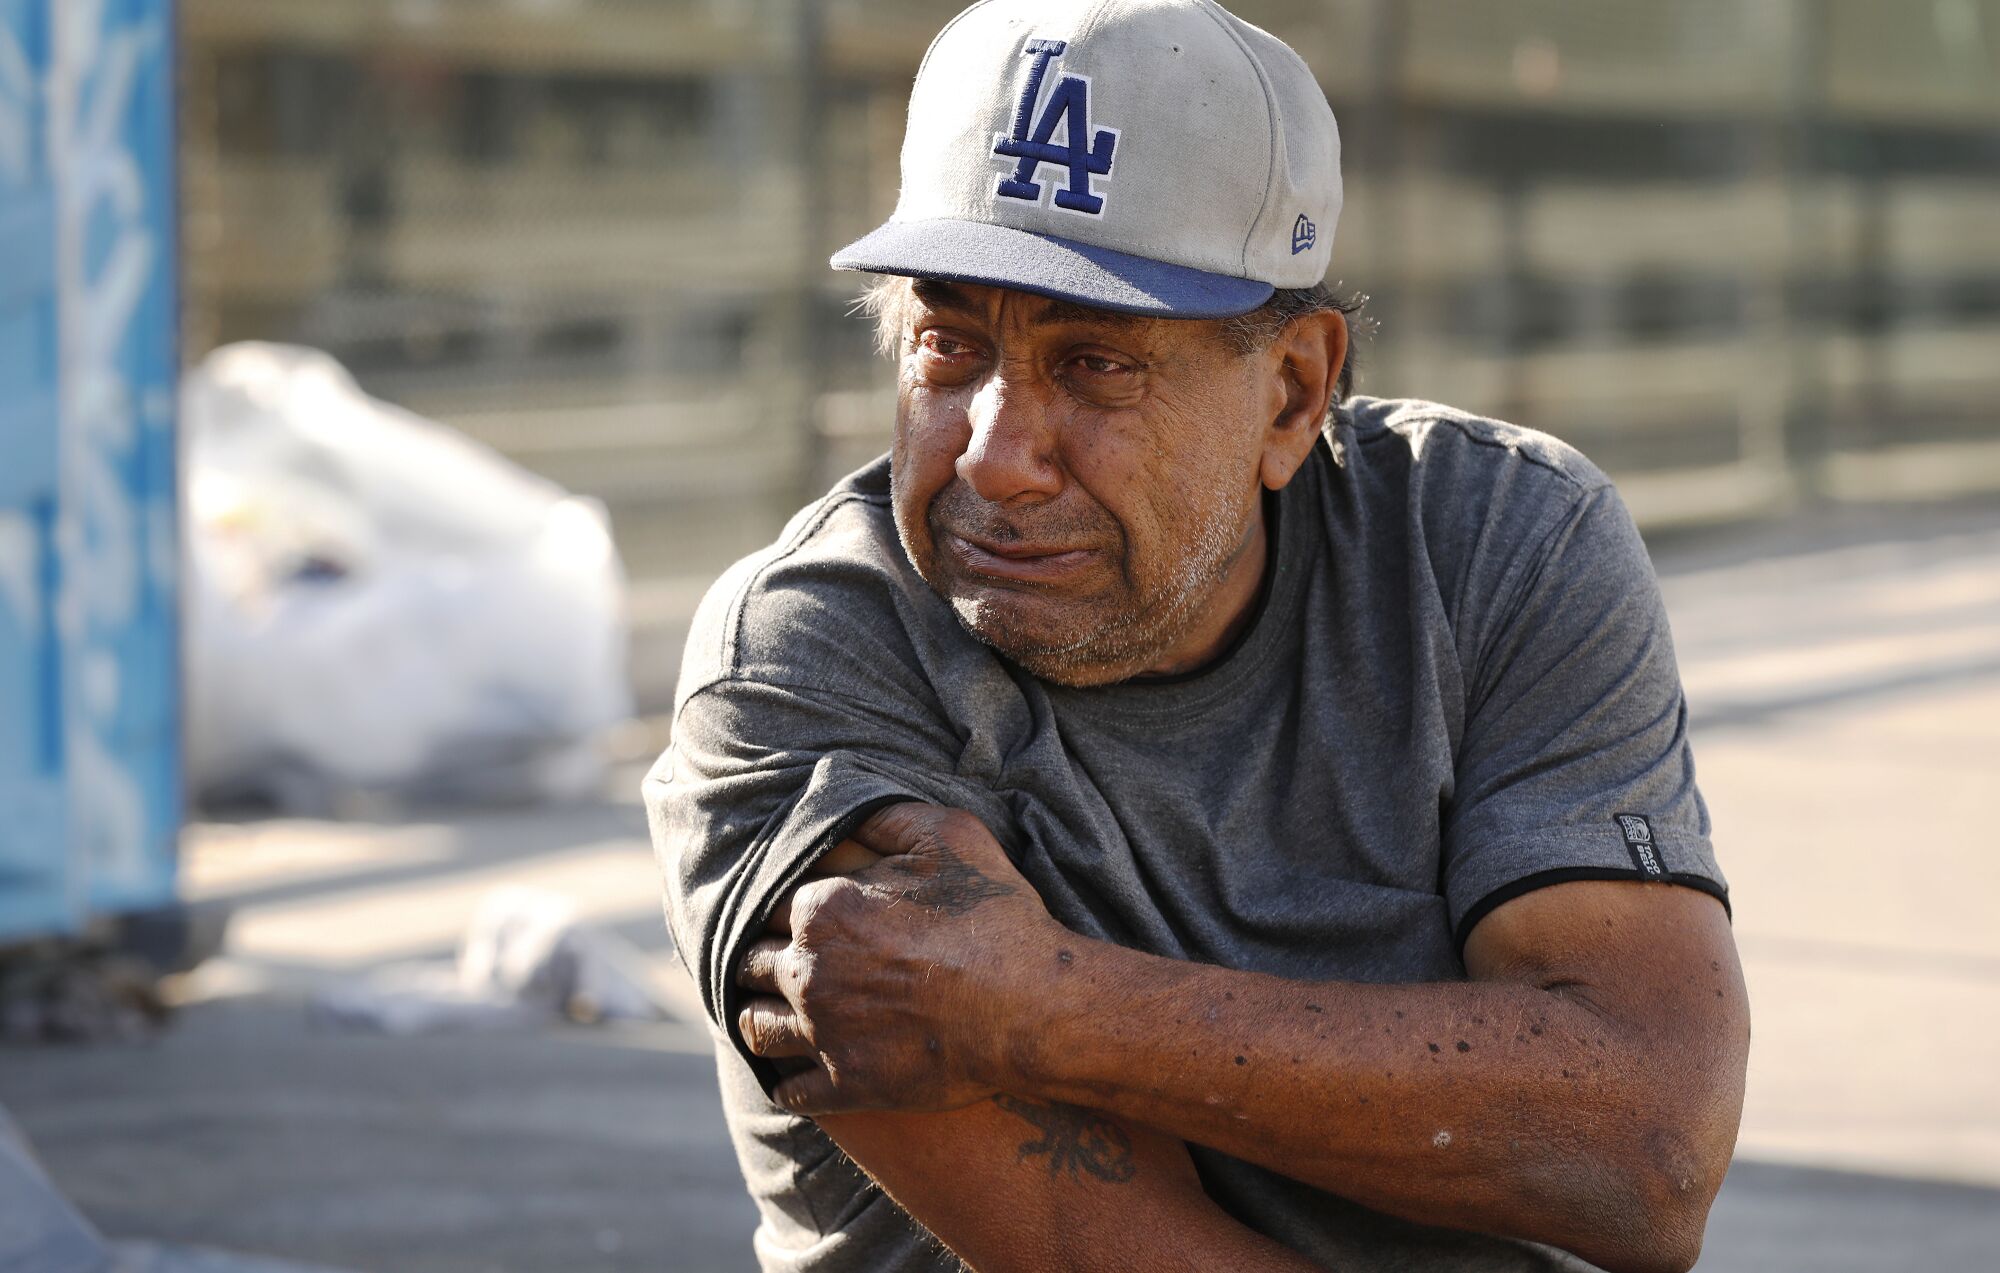 Eric Davido, who previously stayed in the El Puente shelter, sits outside his tent on a bridge over the 101 Freeway.